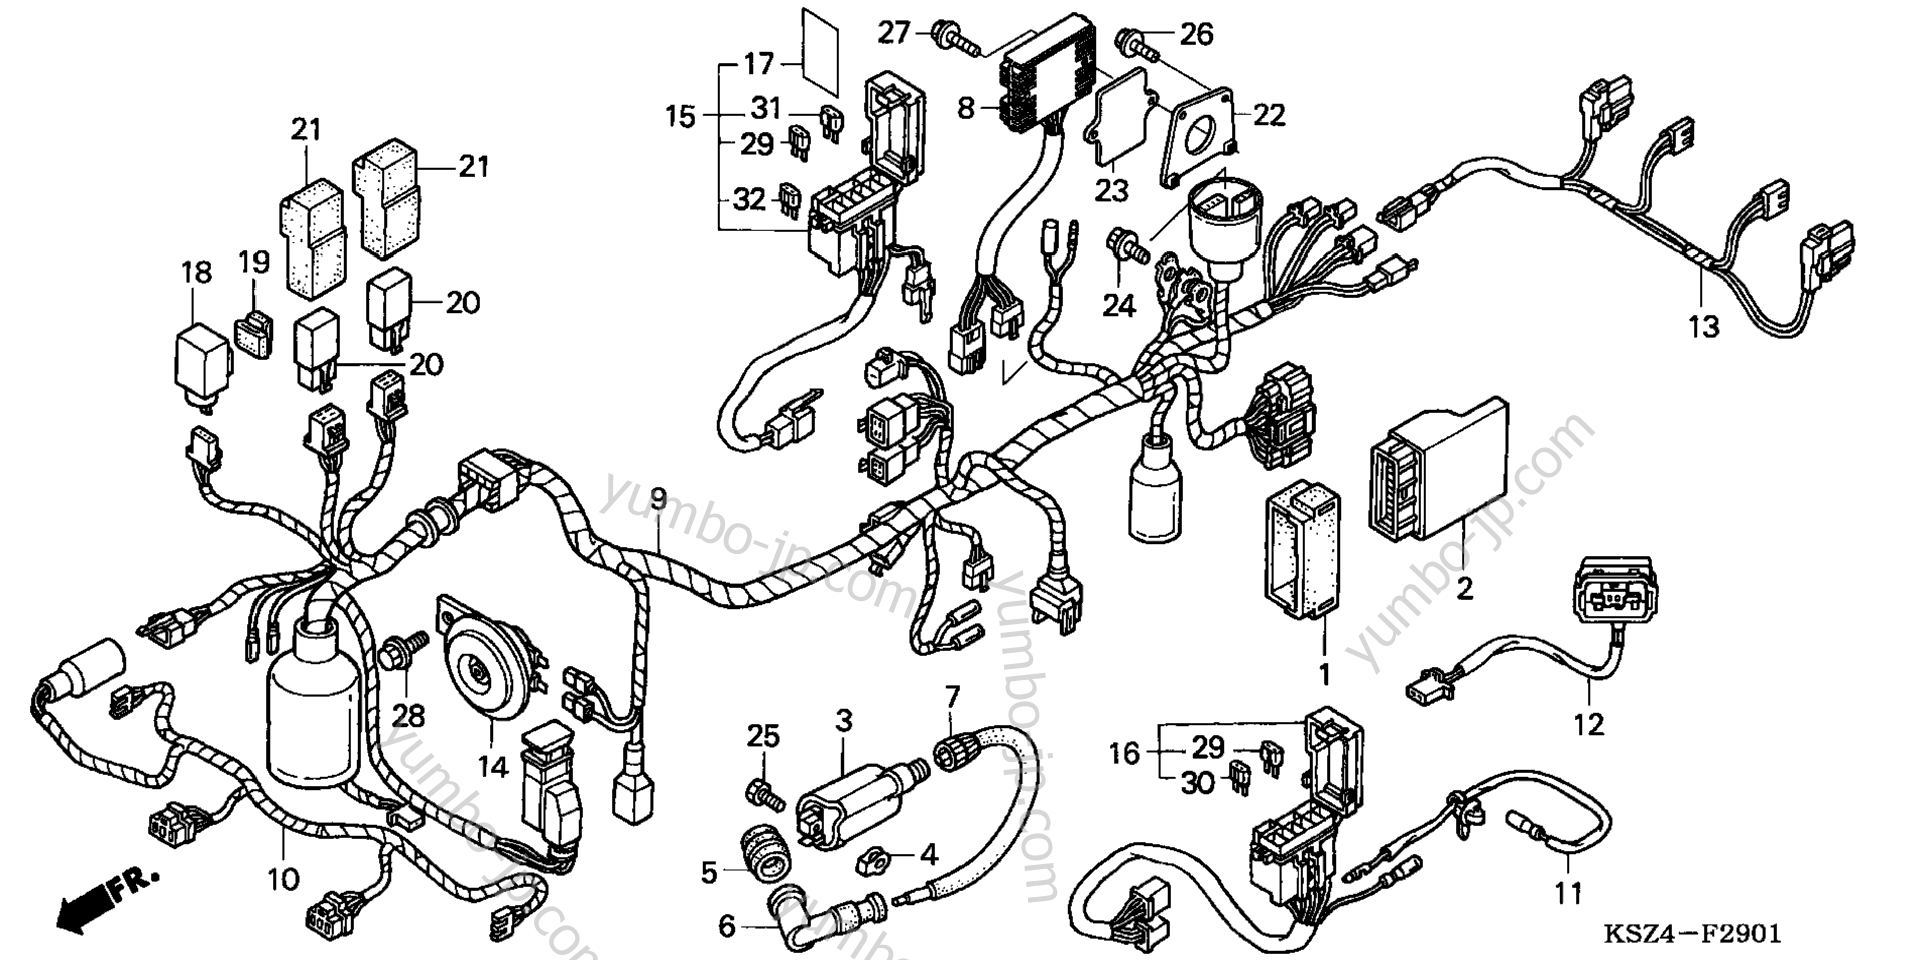 WIRE HARNESS (ABS) for scooters HONDA NSS250AS SAC 2005 year